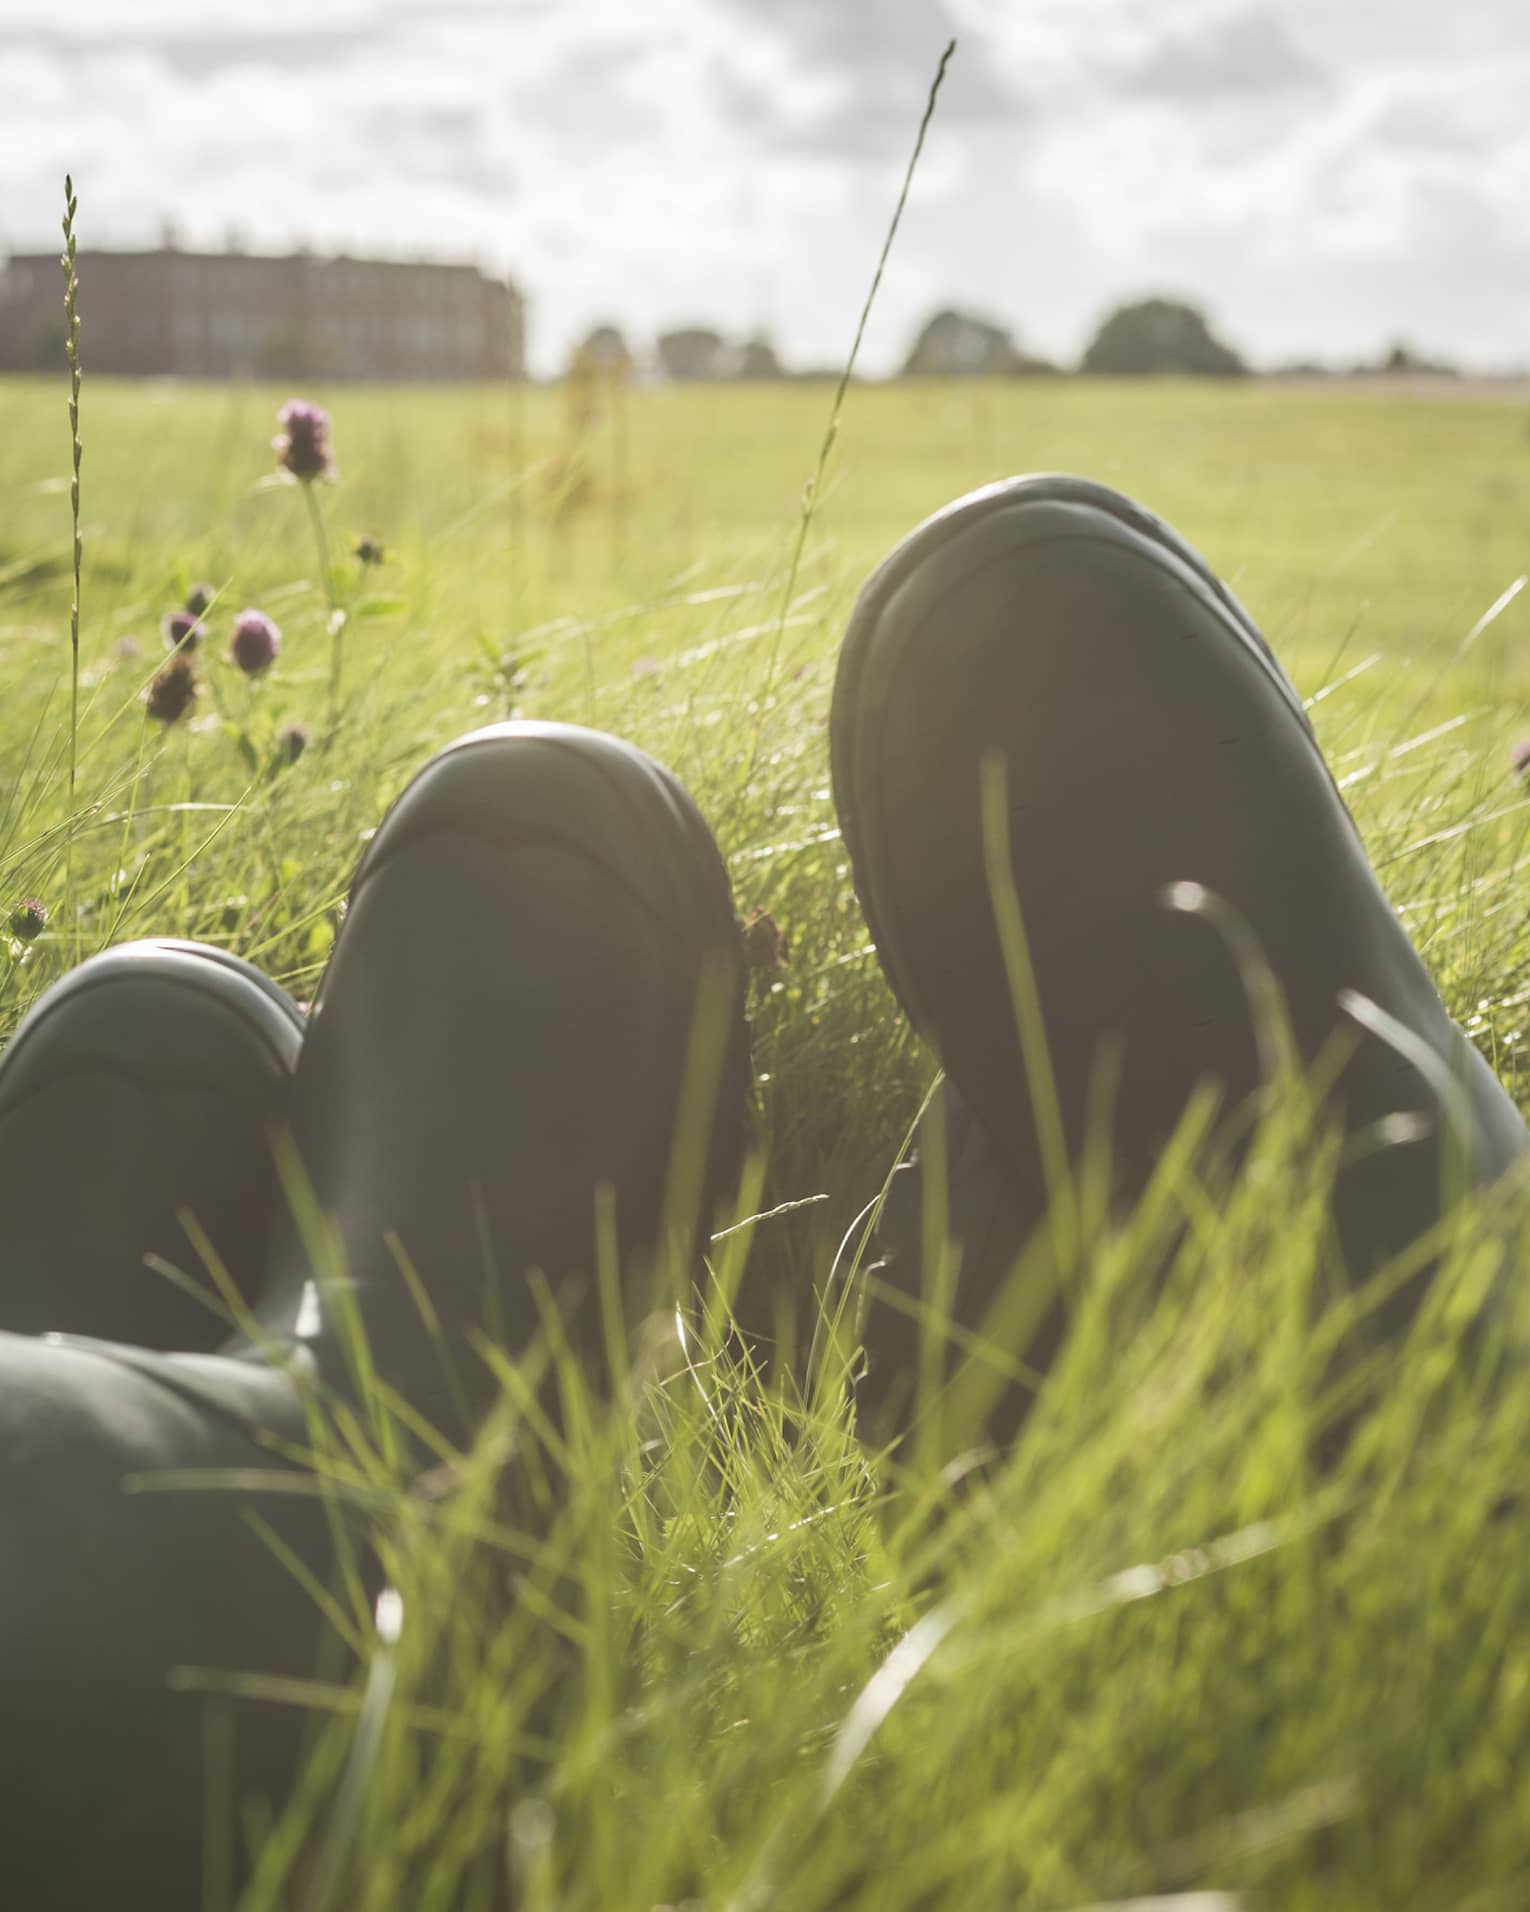 Close-up of people wearing rubber boots, relaxing in tall grass in English countryside